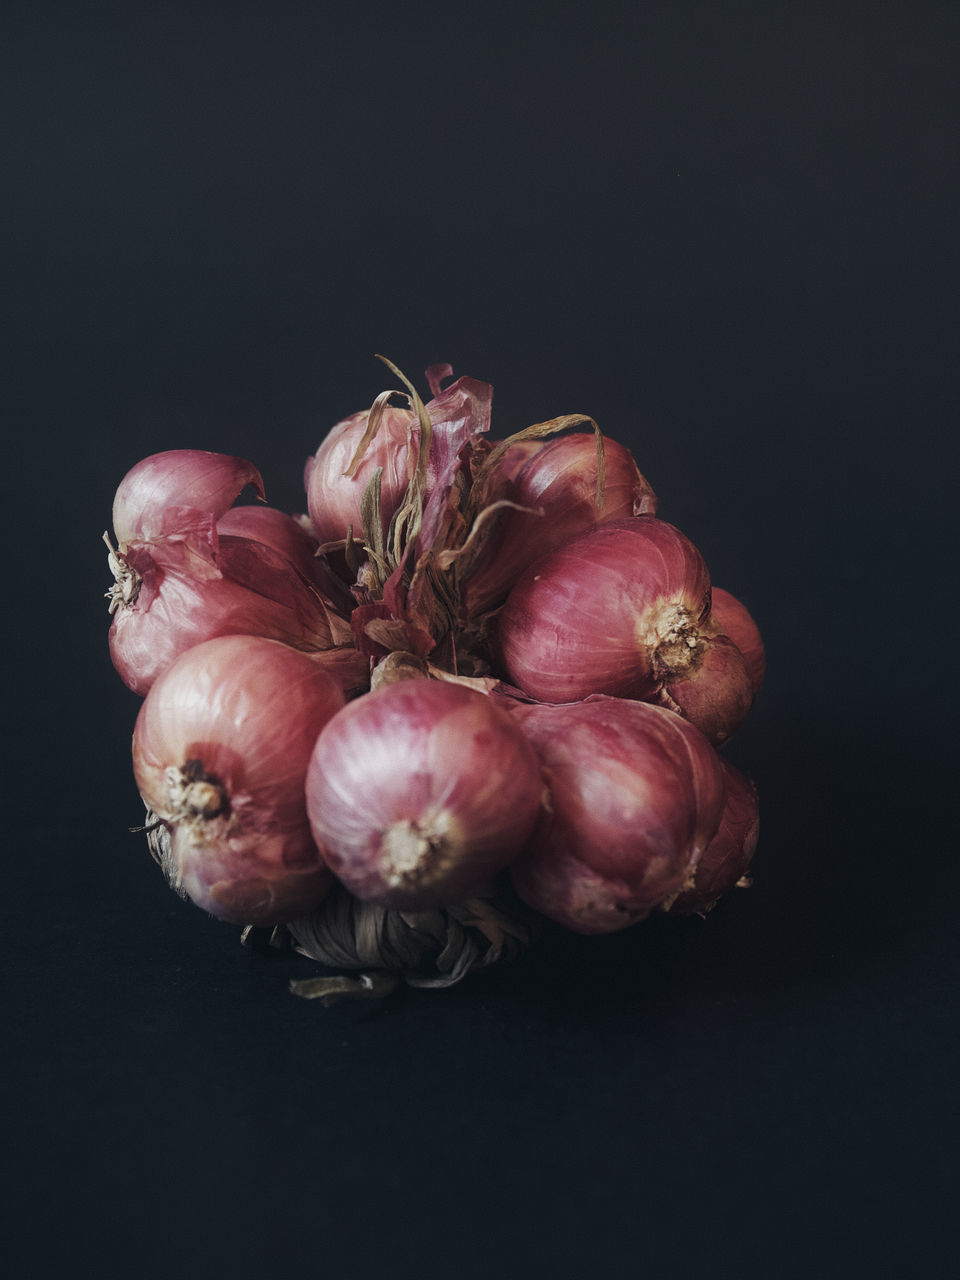 food and drink, food, freshness, studio shot, plant, wellbeing, healthy eating, produce, indoors, vegetable, flower, black background, ingredient, garlic, still life, red onion, shallot, spice, onion, garlic bulb, no people, raw food, copy space, organic, macro photography, close-up, still life photography, petal